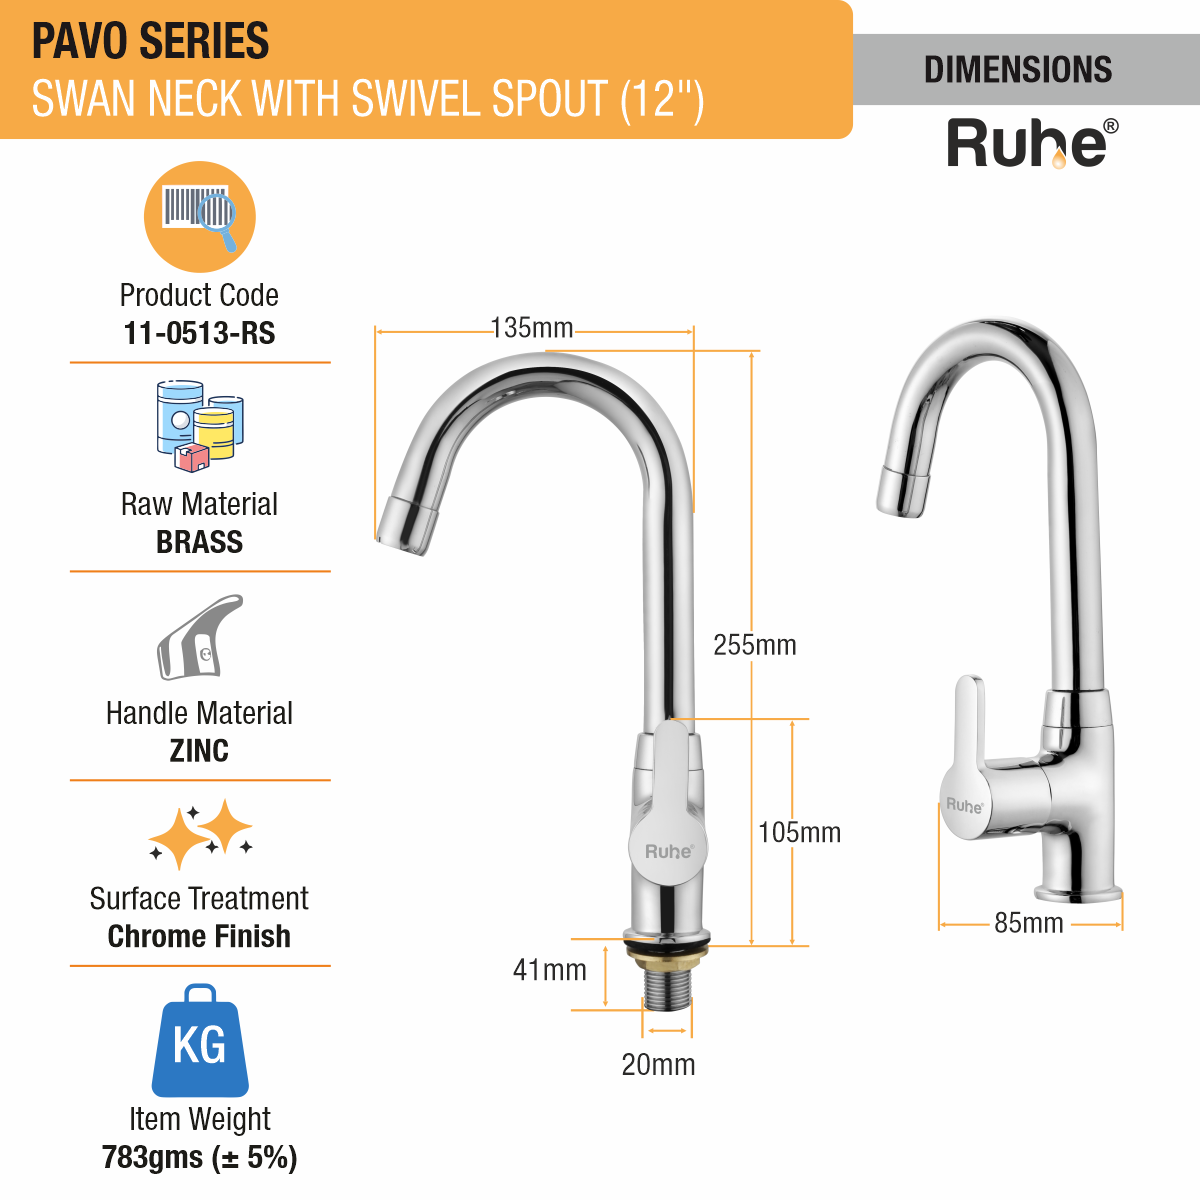 Pavo Swan Neck with Small (12 inches) Round Swivel Spout Brass Faucet dimensions and size